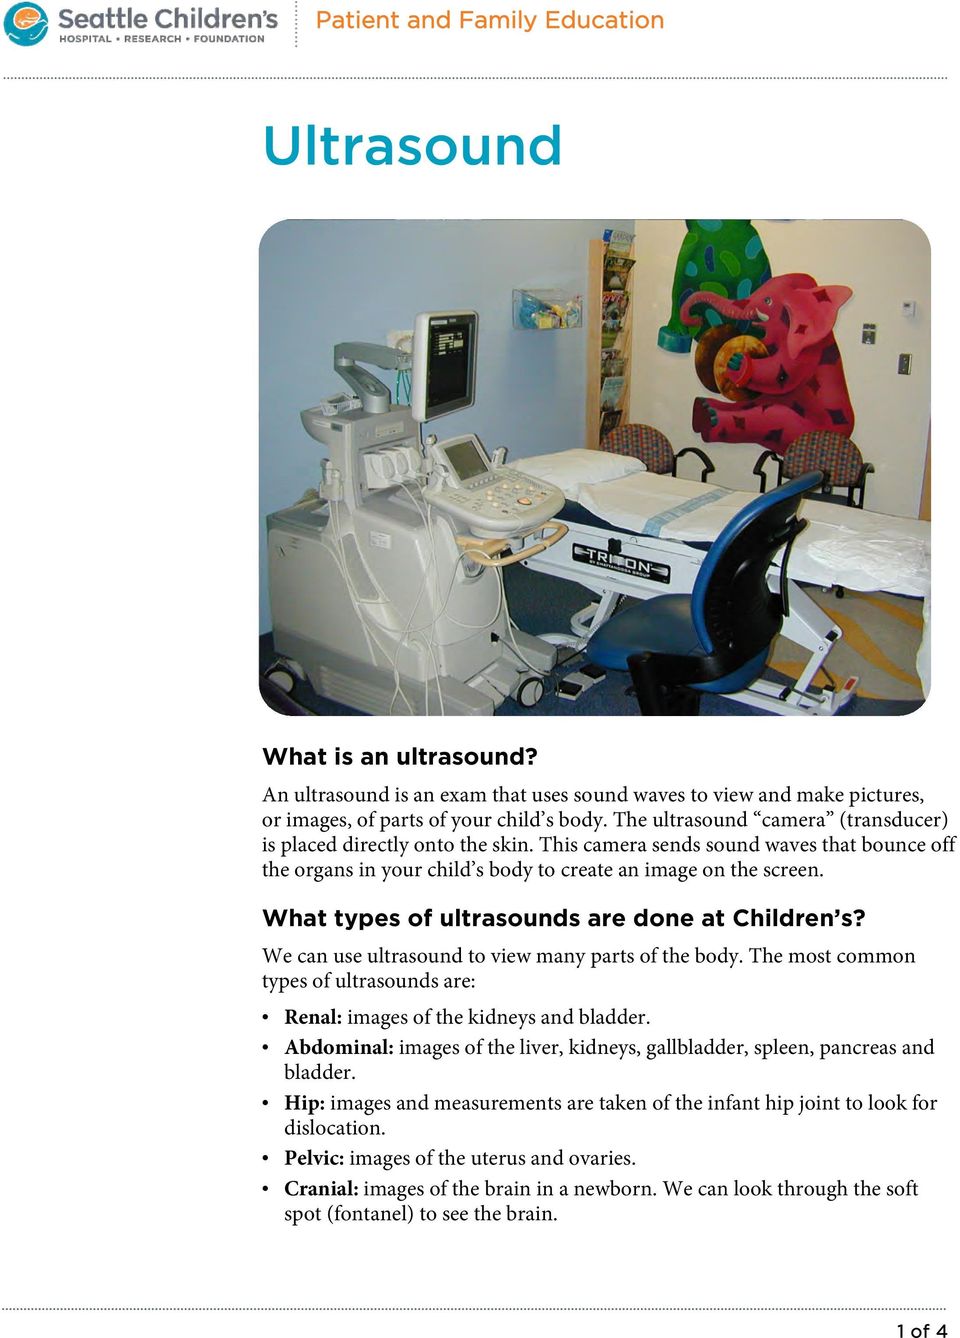 What types of ultrasounds are done at Children s? We can use ultrasound to view many parts of the body. The most common types of ultrasounds are: Renal: images of the kidneys and bladder.